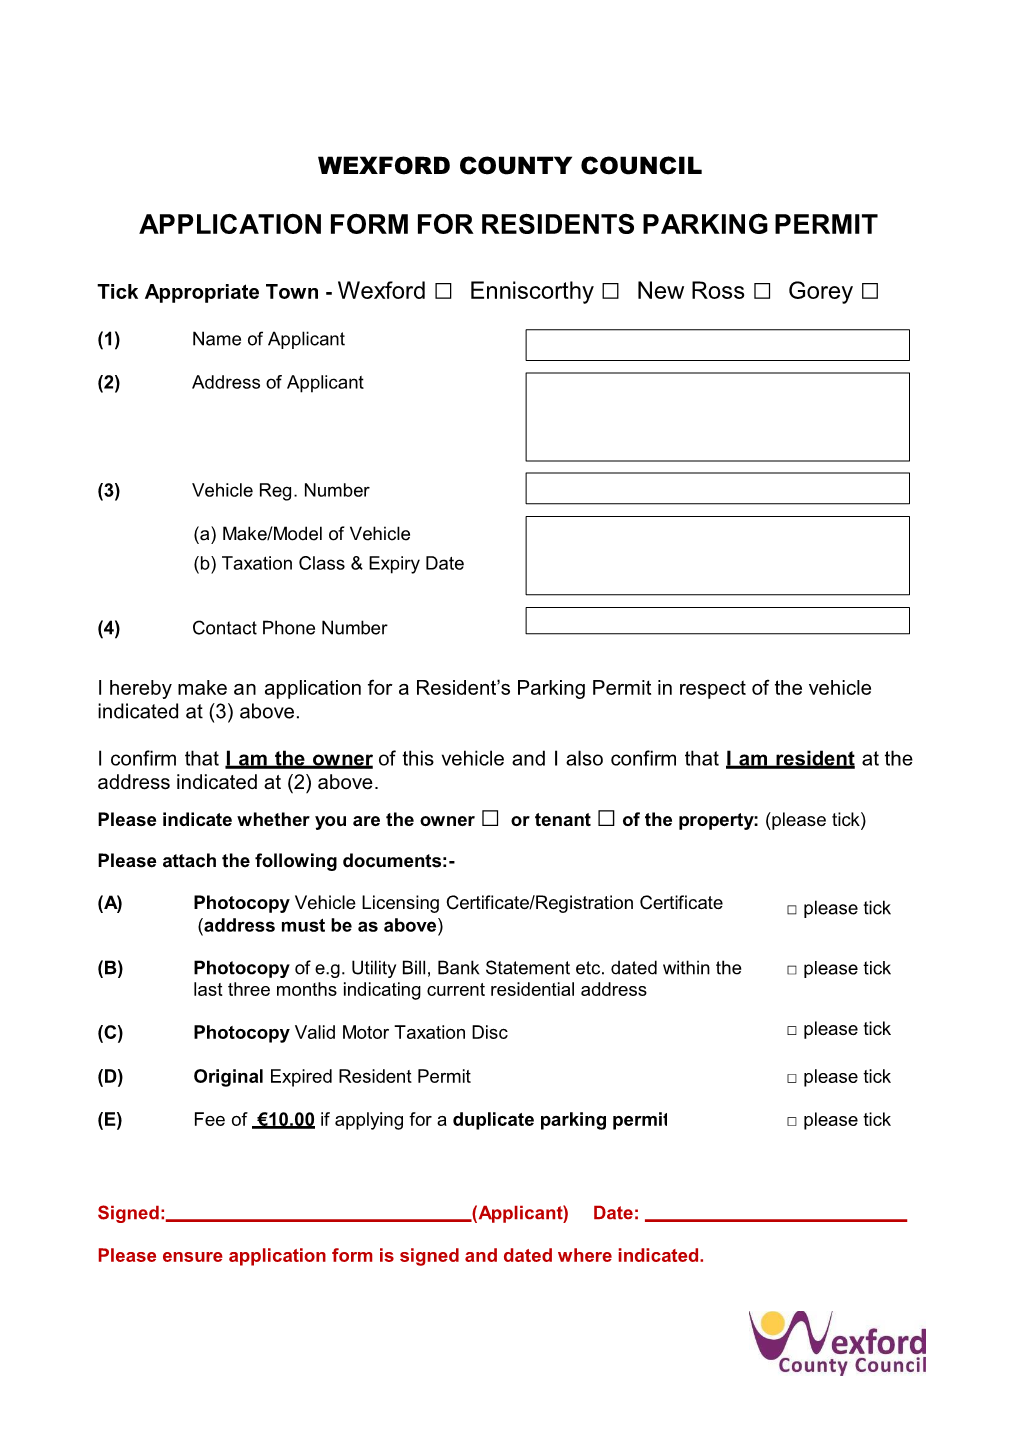 Application Form for Residents Parking Permit